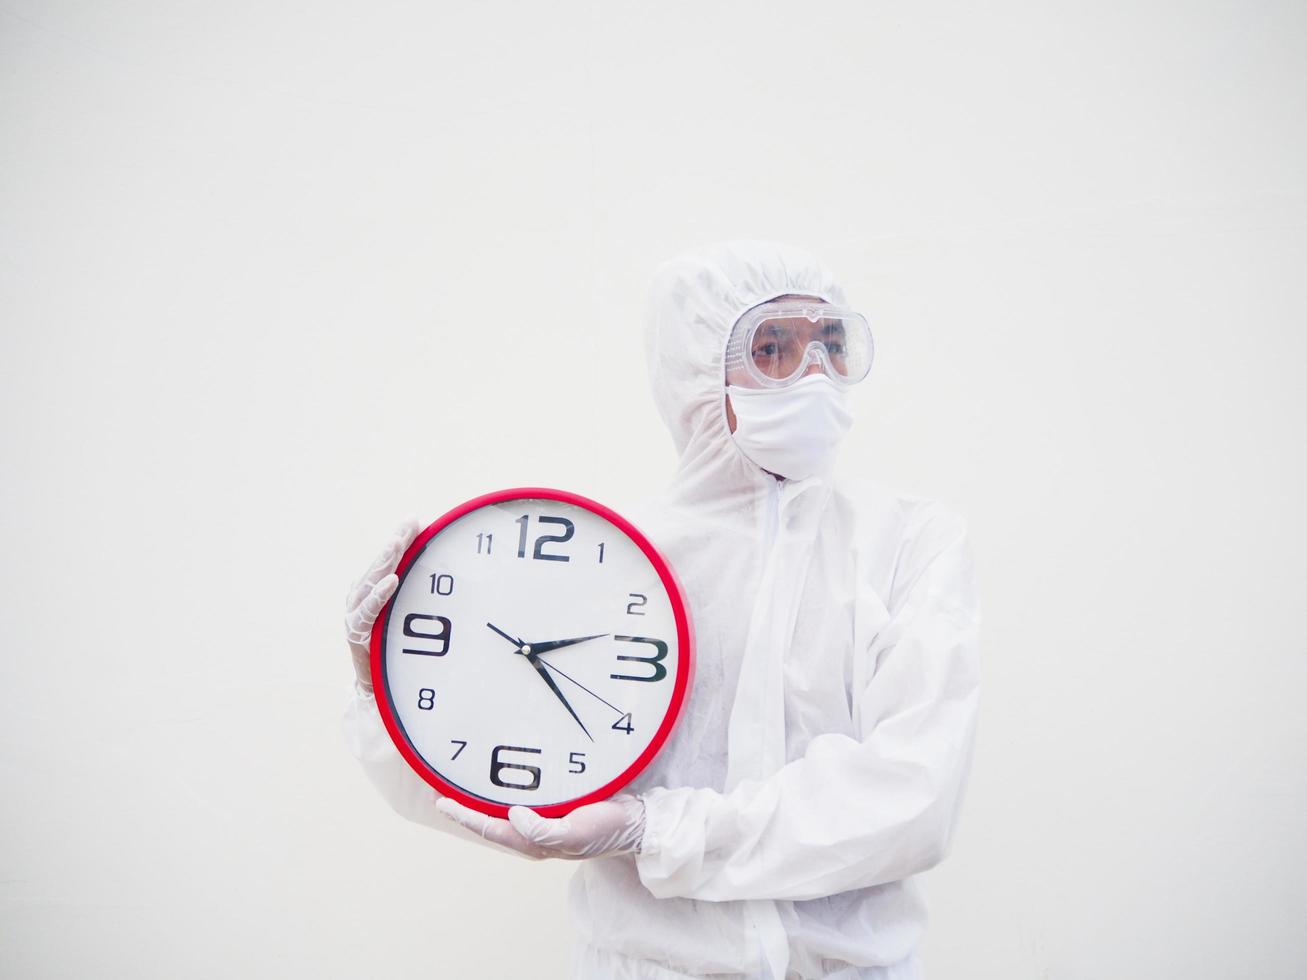 Portrait of doctor or scientist in PPE suite uniform holding red alarm clock and looking to the left In various gestures. COVID-19 concept isolated white background photo